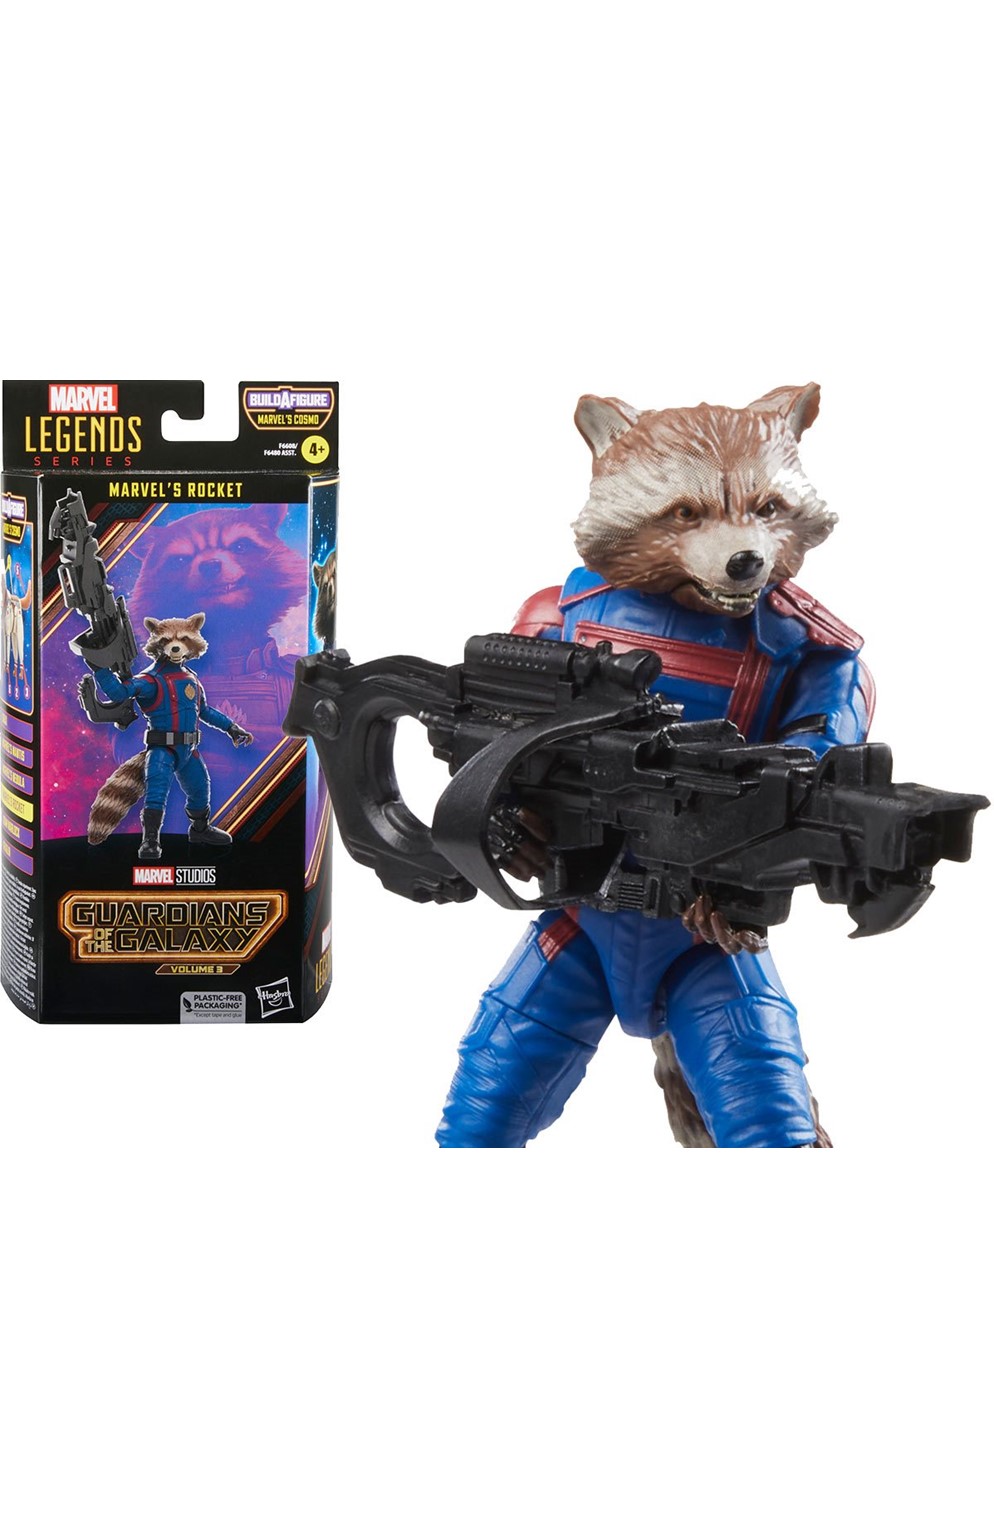 Guardians of the Galaxy Volume 3 Marvel Legends Rocket 6-Inch Action Figure
